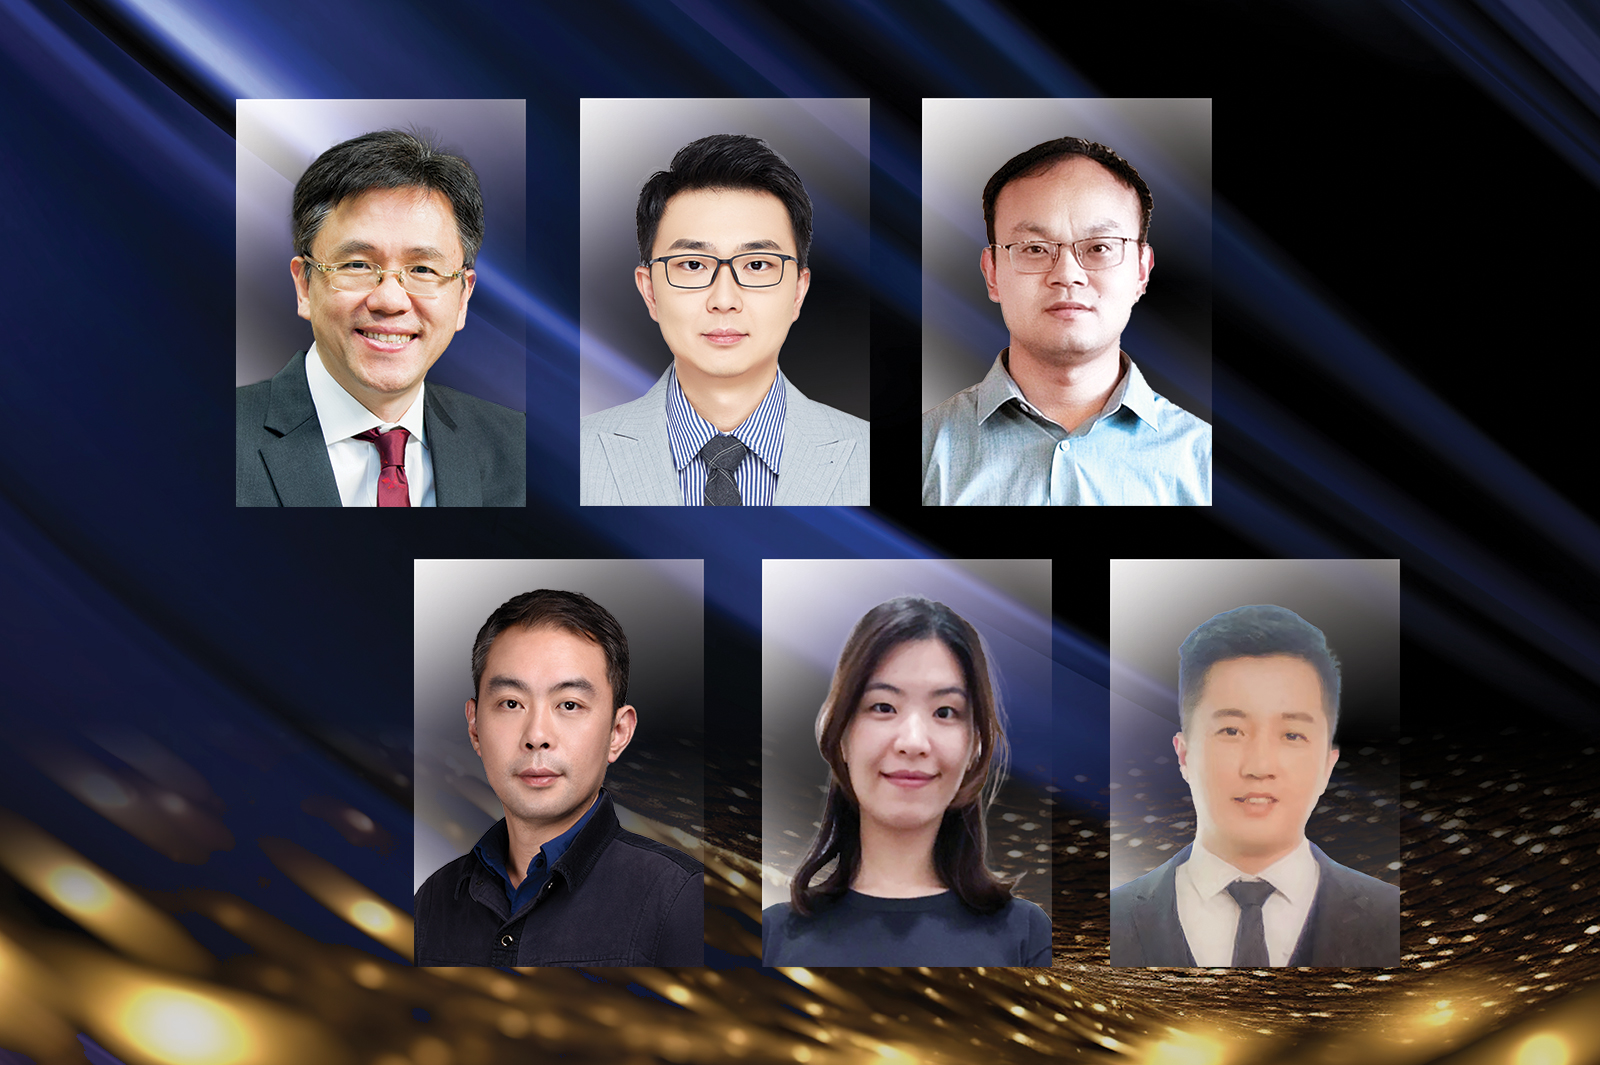 (Upper row, from left) Professor Sun Dong, Dr Li Junyang and Dr Niu Fuzhou. (Lower row, from left) Dr Wang Can, Dr Ma Weicheng and Dr Chen Jian.